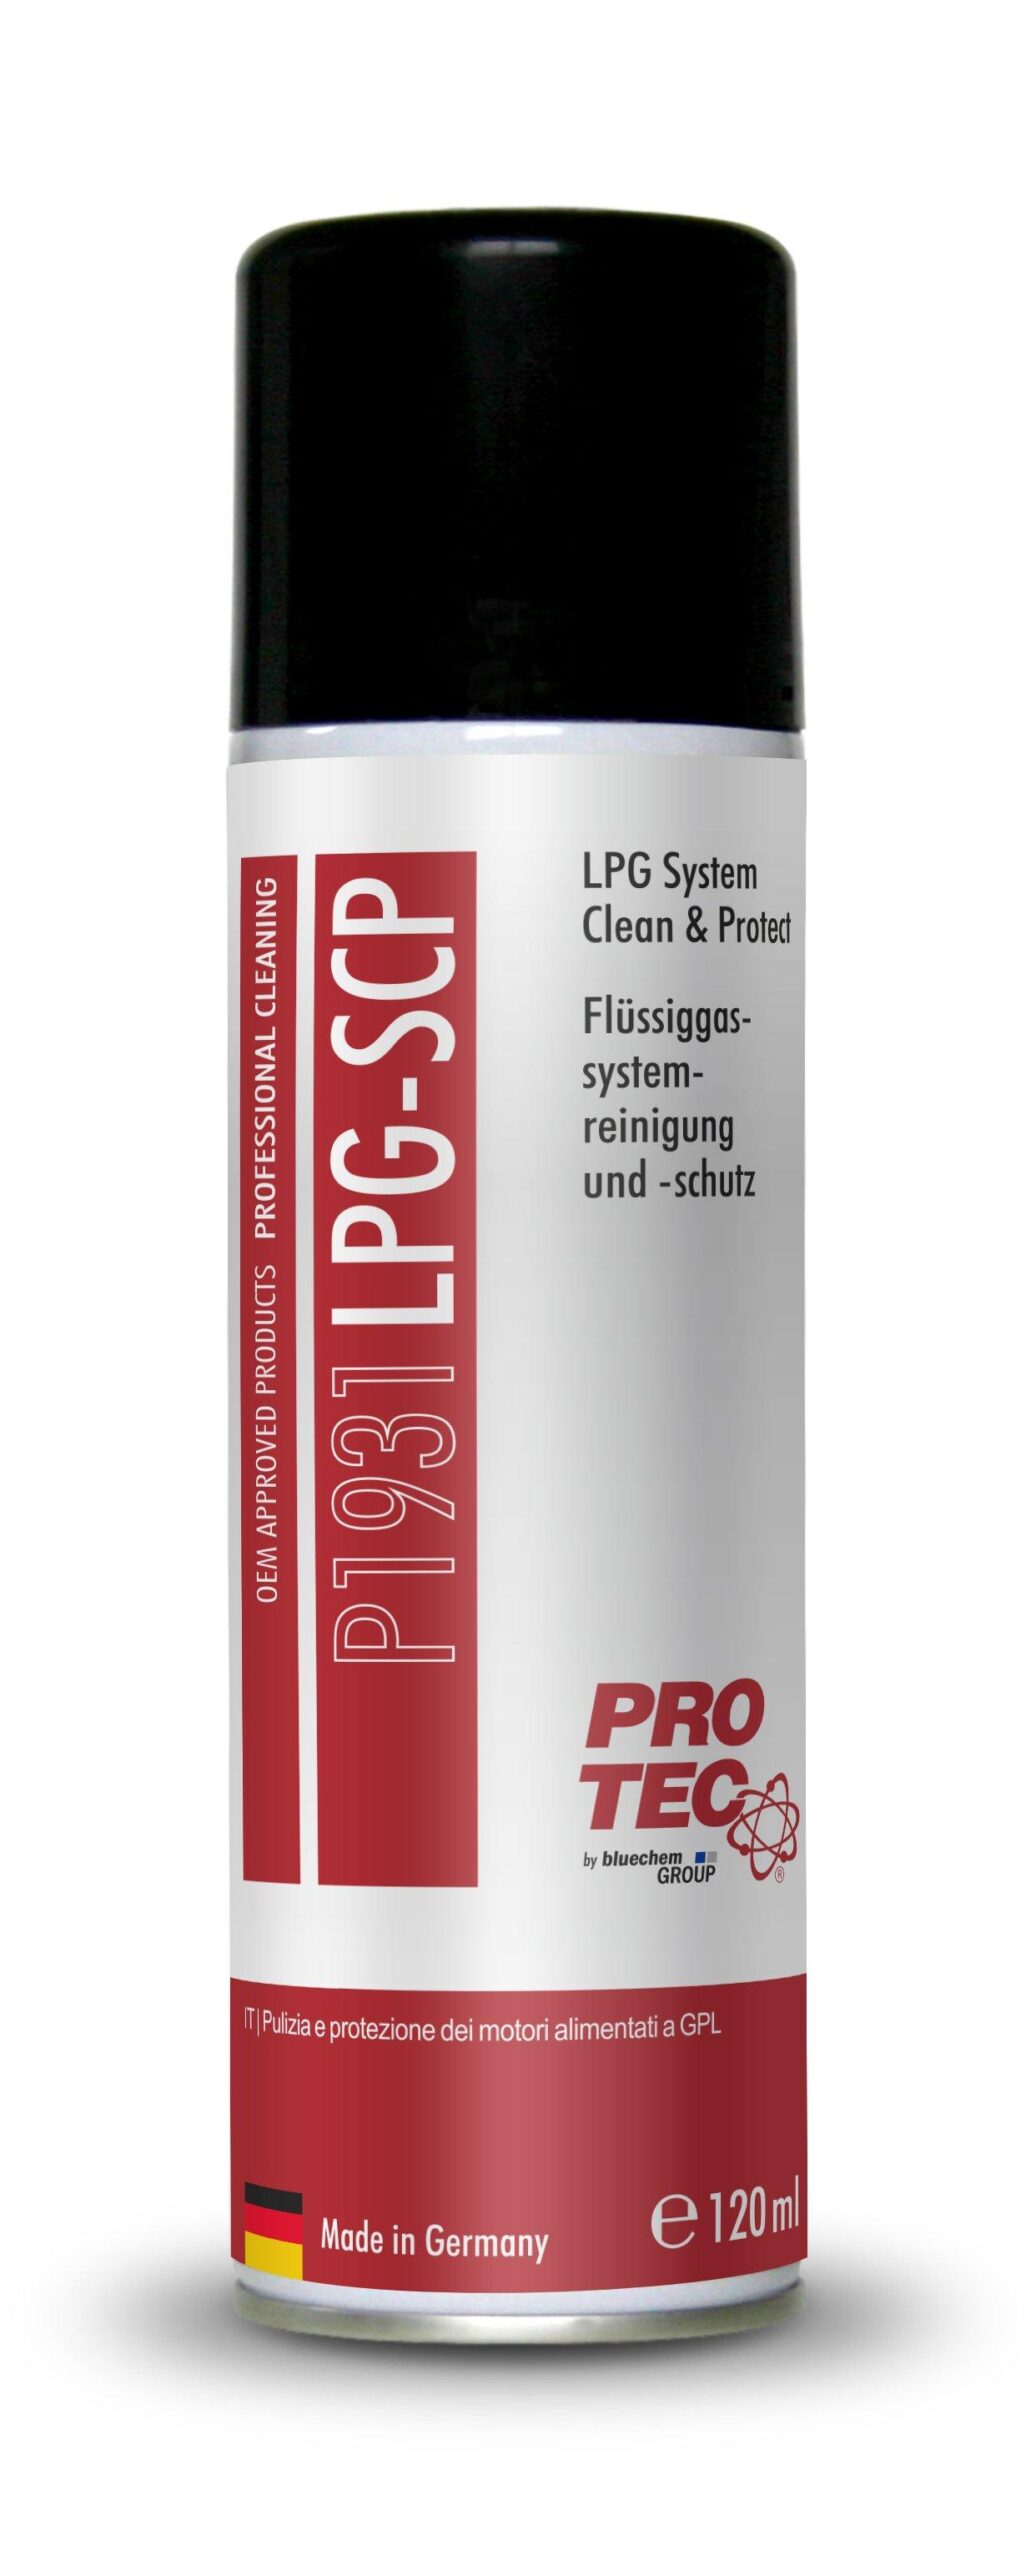 PRO-TEC LPG System Clean & Protect